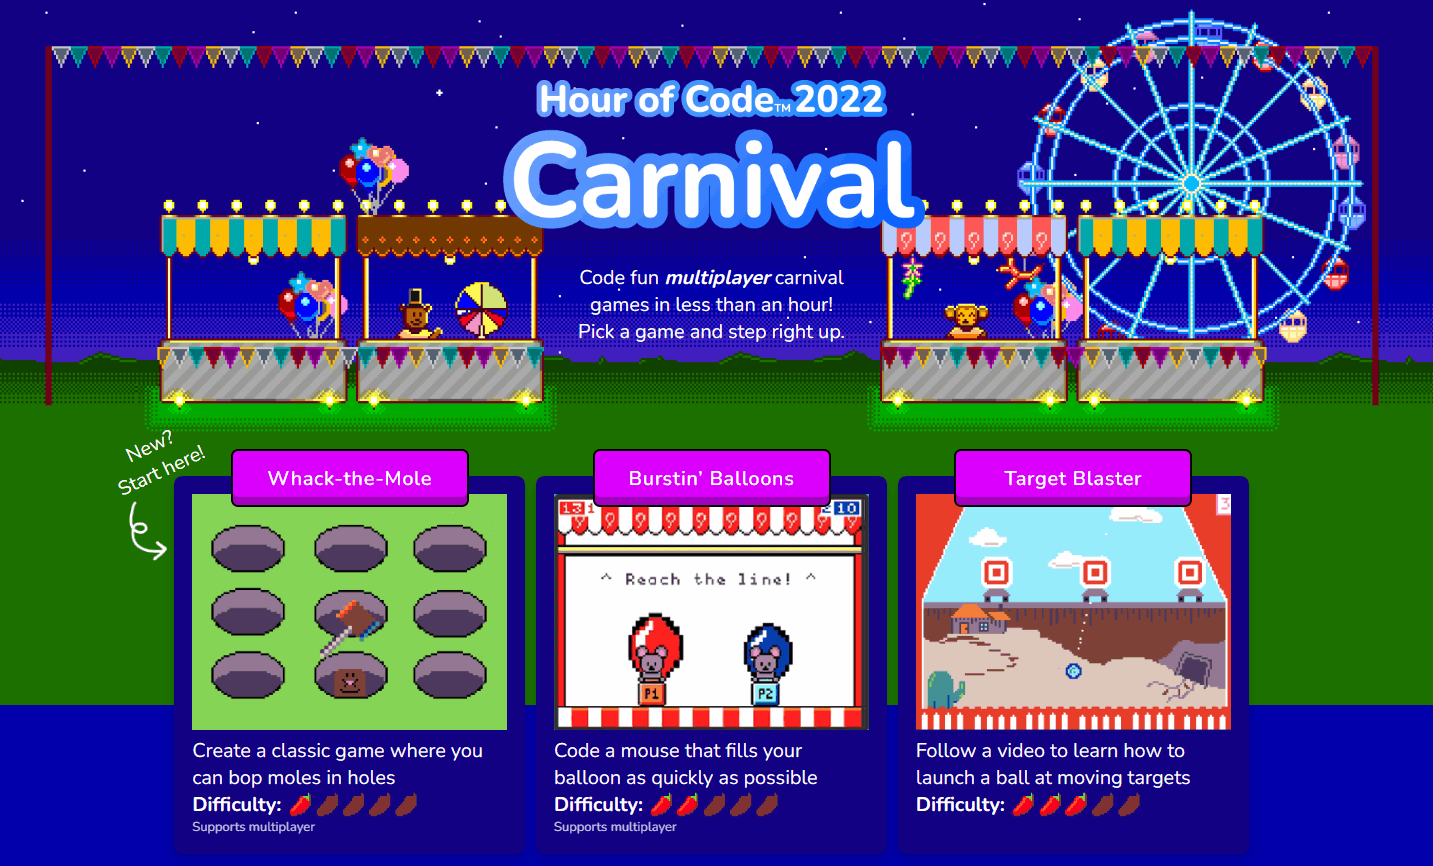 Code a Carnival landing experience in MakeCode, showing a variety of carnival games including Whack-the-Mole, Burstin’ Balloons, and Target Blaster.